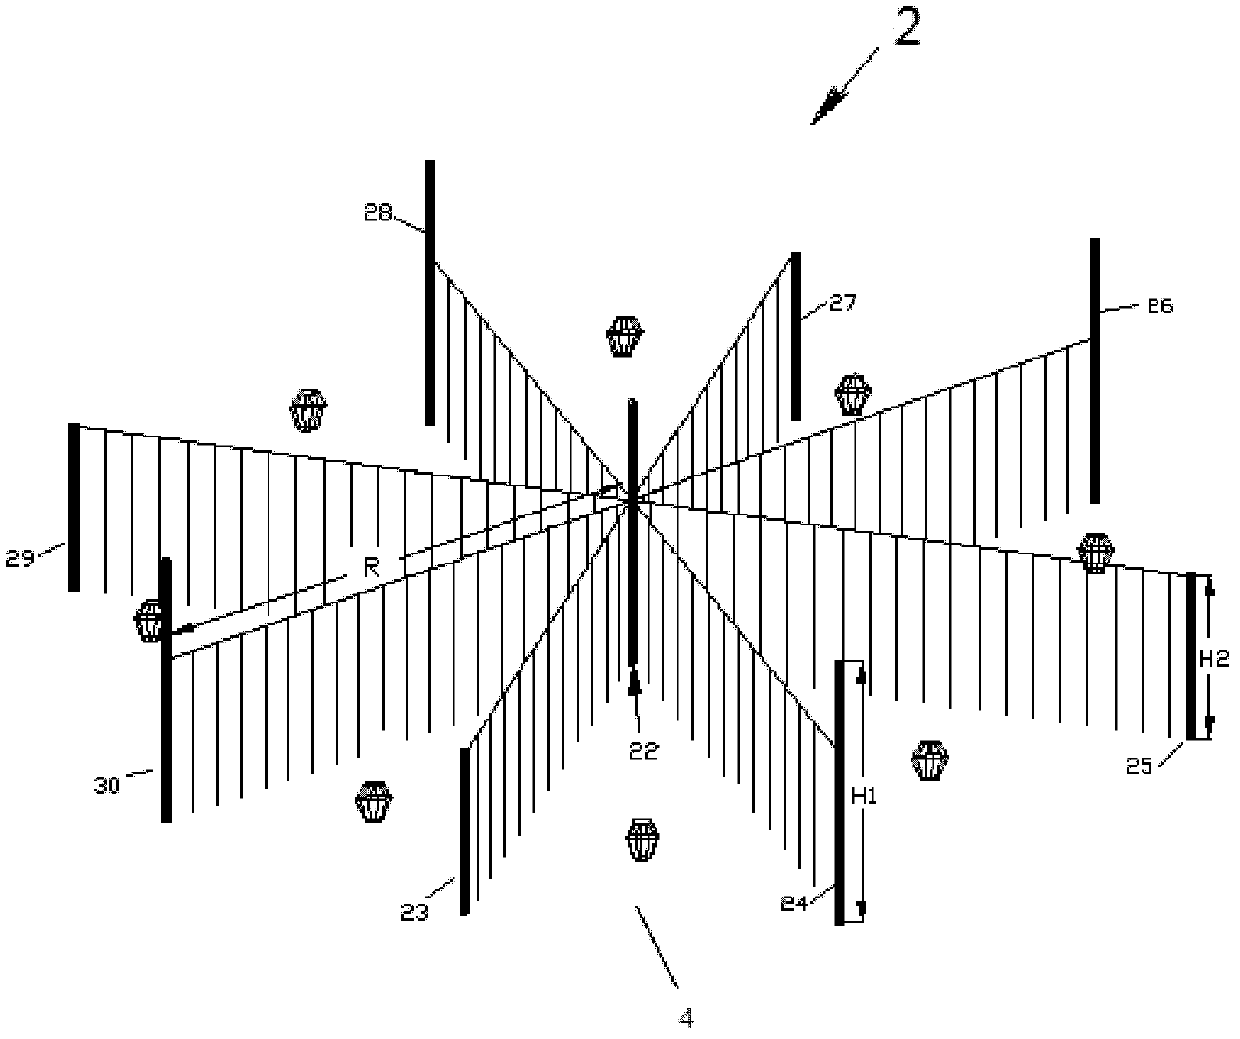 Omnidirectional short-wave high-gain antenna array suitable for use over near, middle and far communication distances